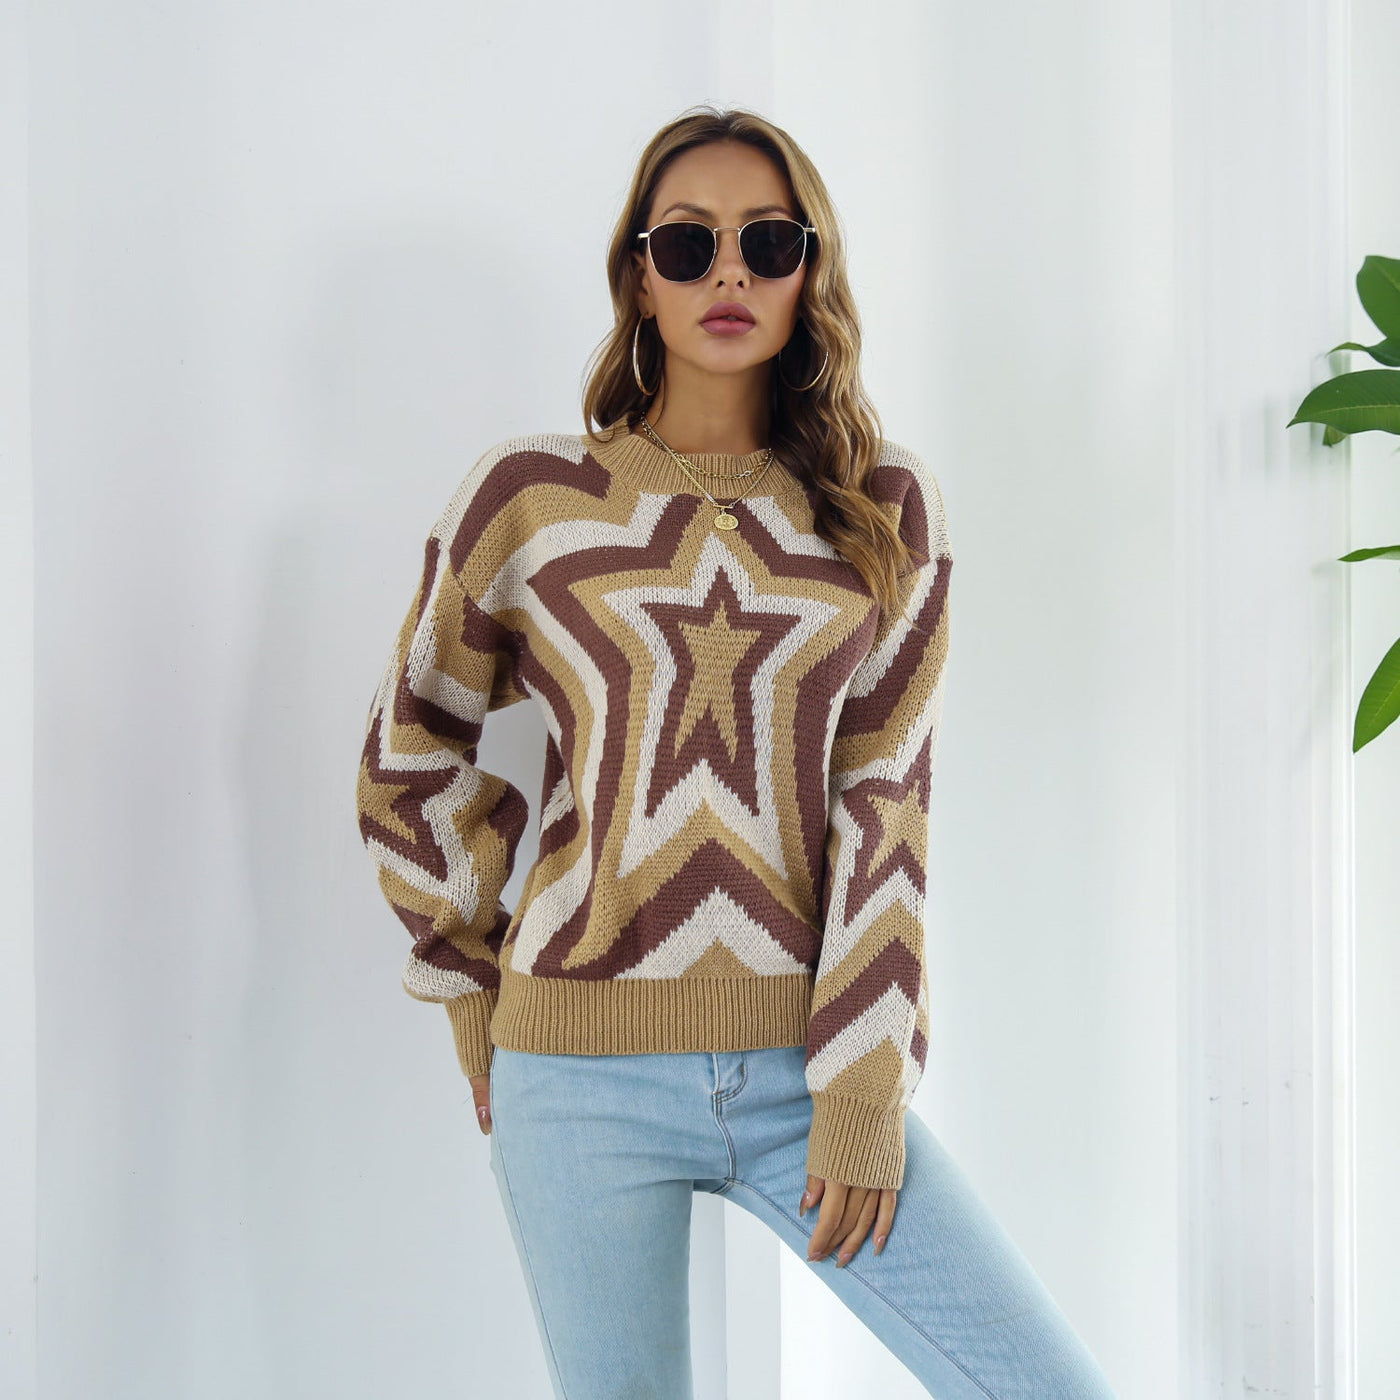 Star Dropped Shoulder Sweater  | KIKI COUTURE-Women's Clothing, Designer Fashions, Shoes, Bags